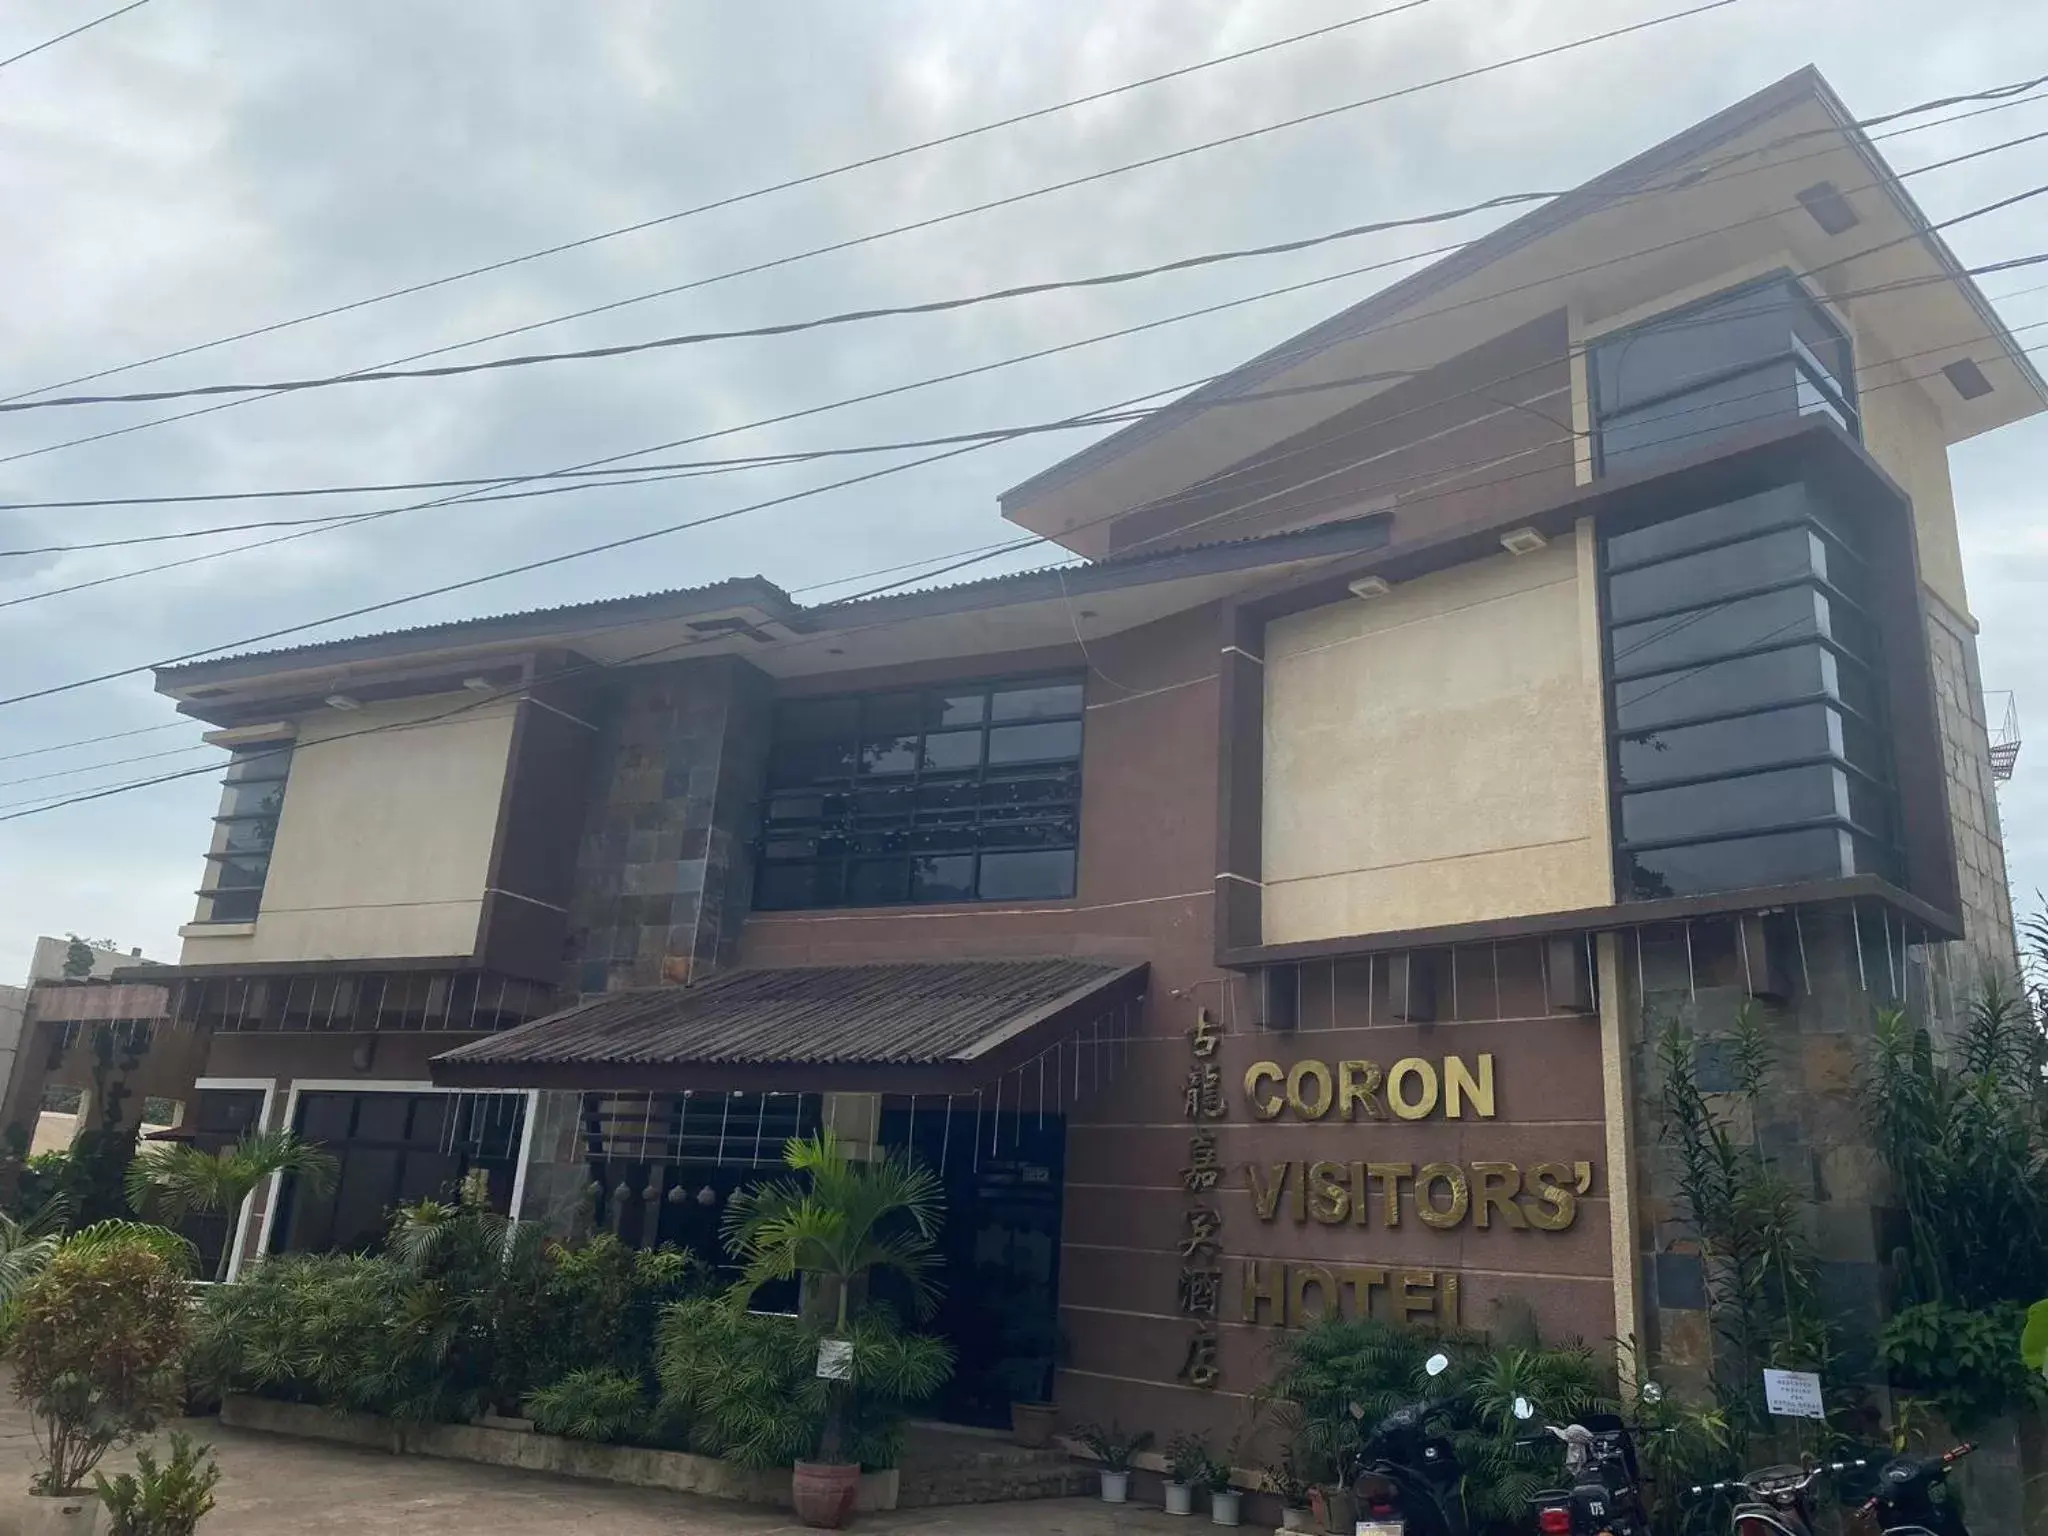 Property Building in Coron Visitors Hotel